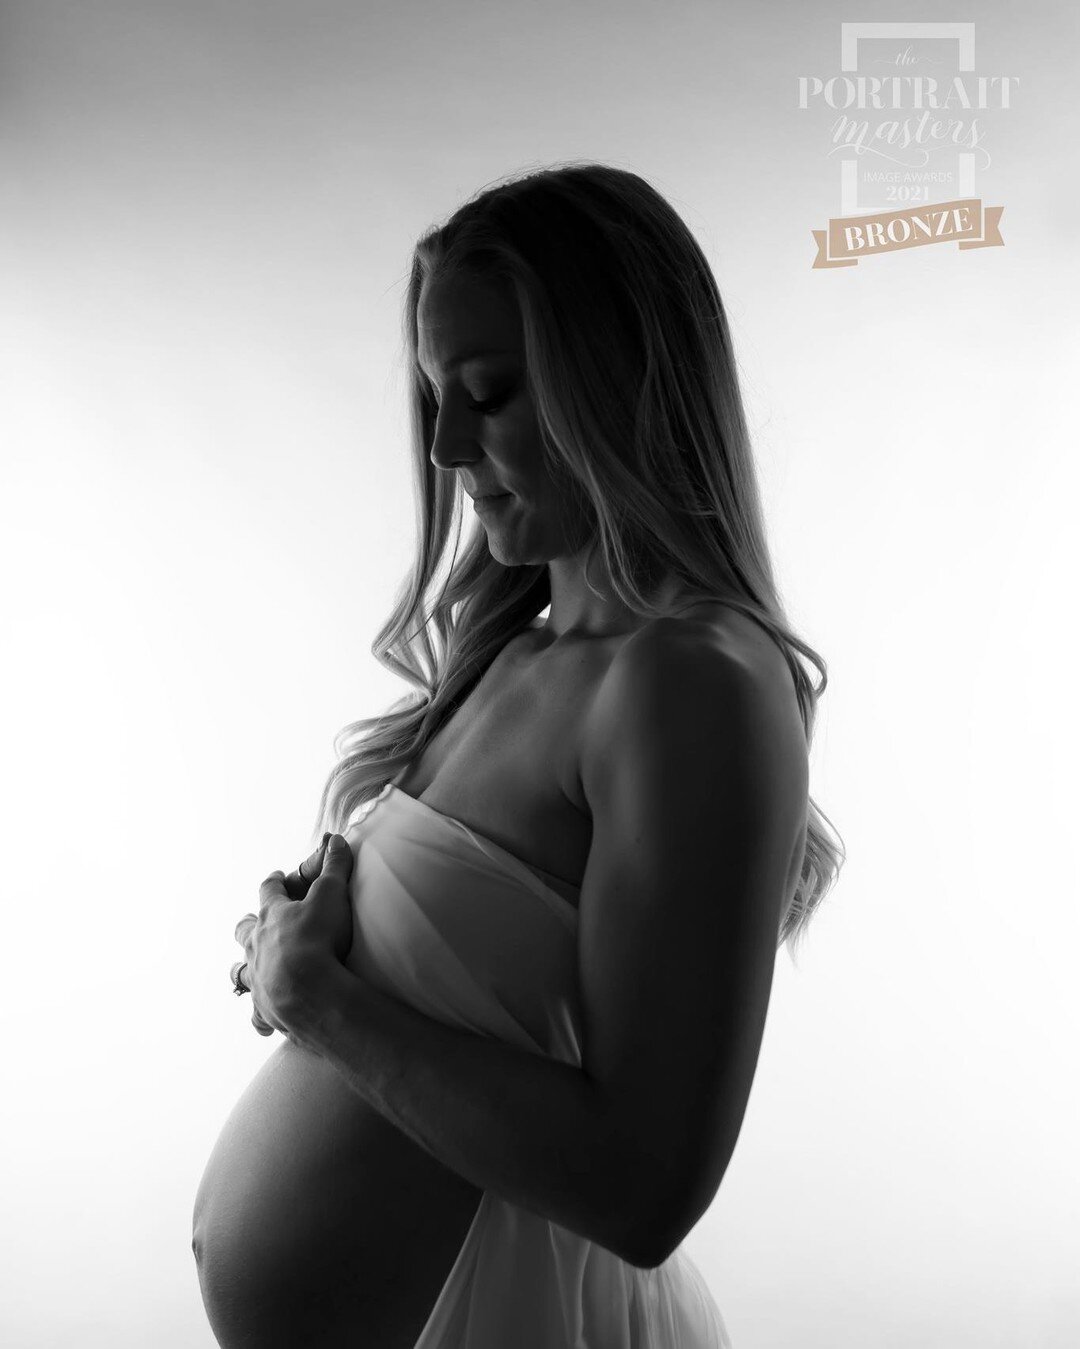 I love the simplicity and tenderness of this photo. A new mother and her baby bump. 

#newburghindiana  #portrait #portraitphotography #materityphotography